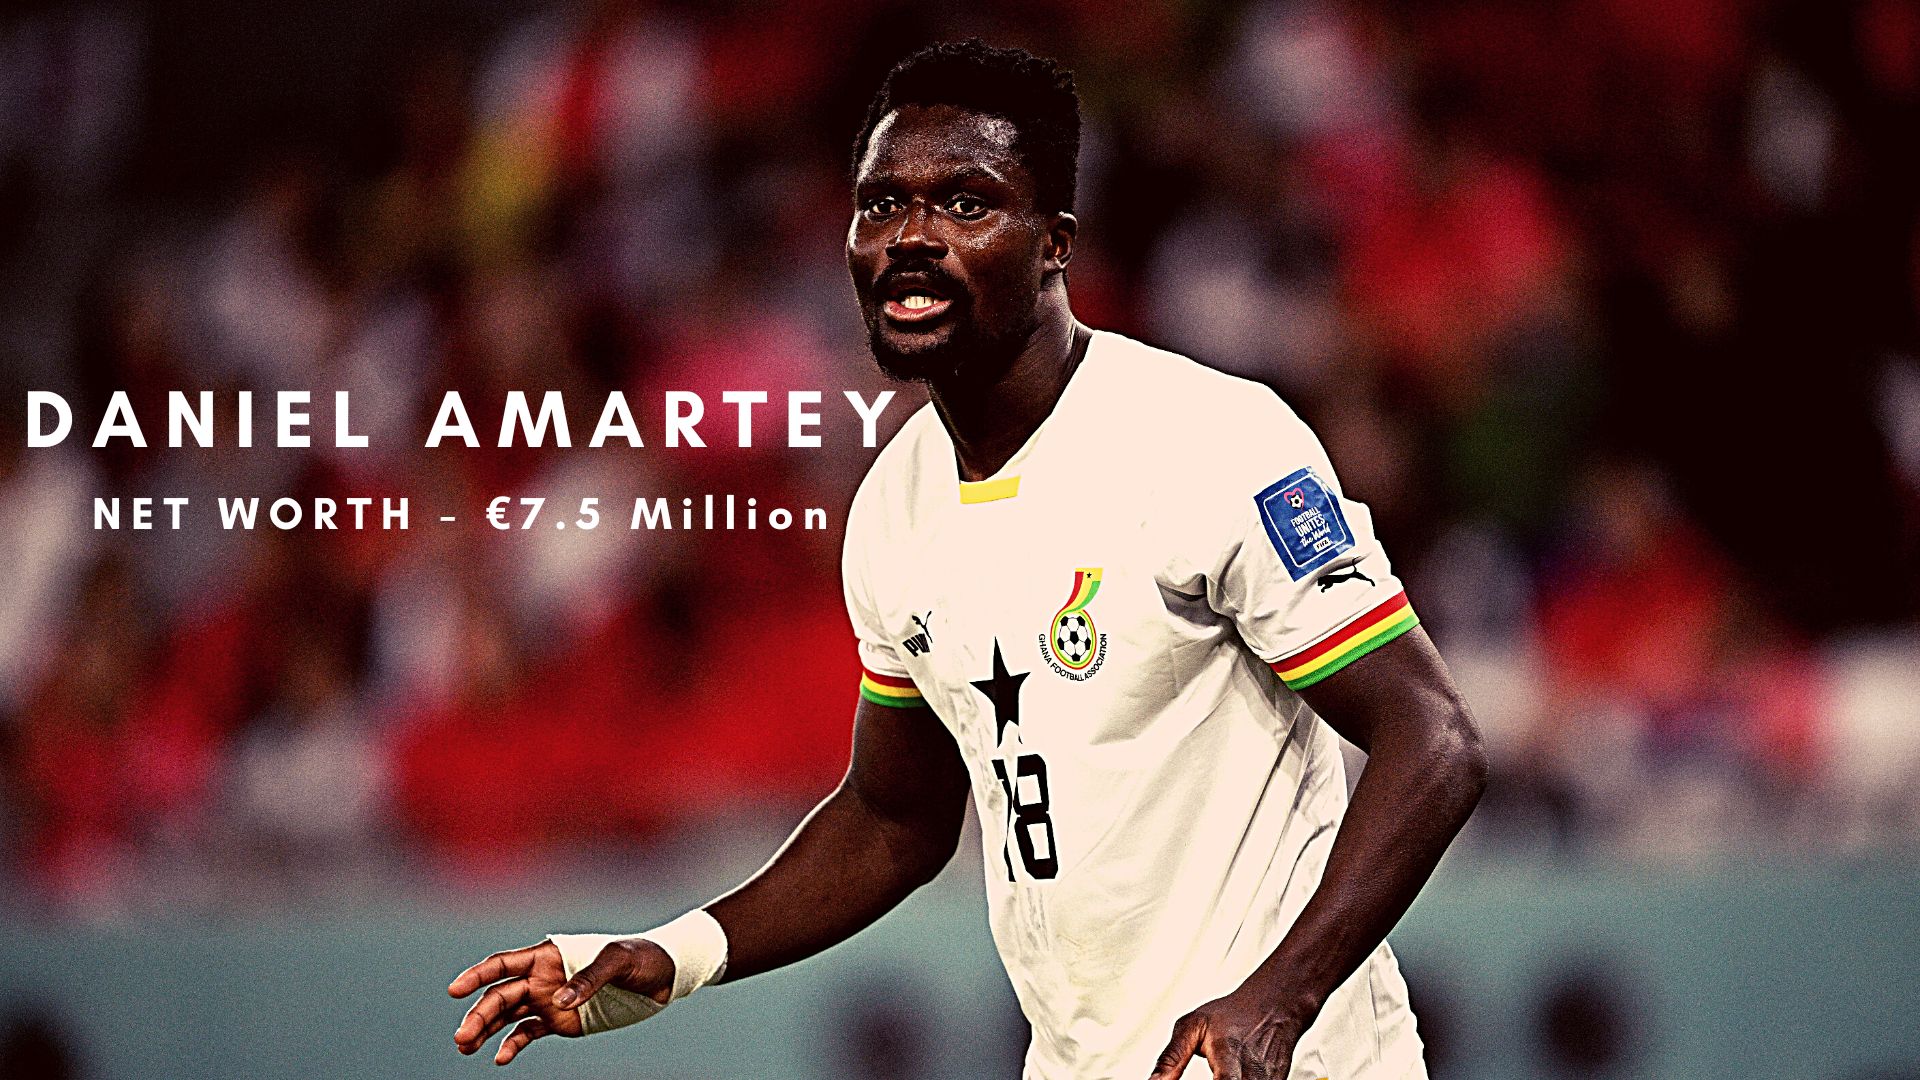 Daniel Amartey in action during the FIFA World Cup Qatar 2022 Group H match between Korea Republic and Ghana.